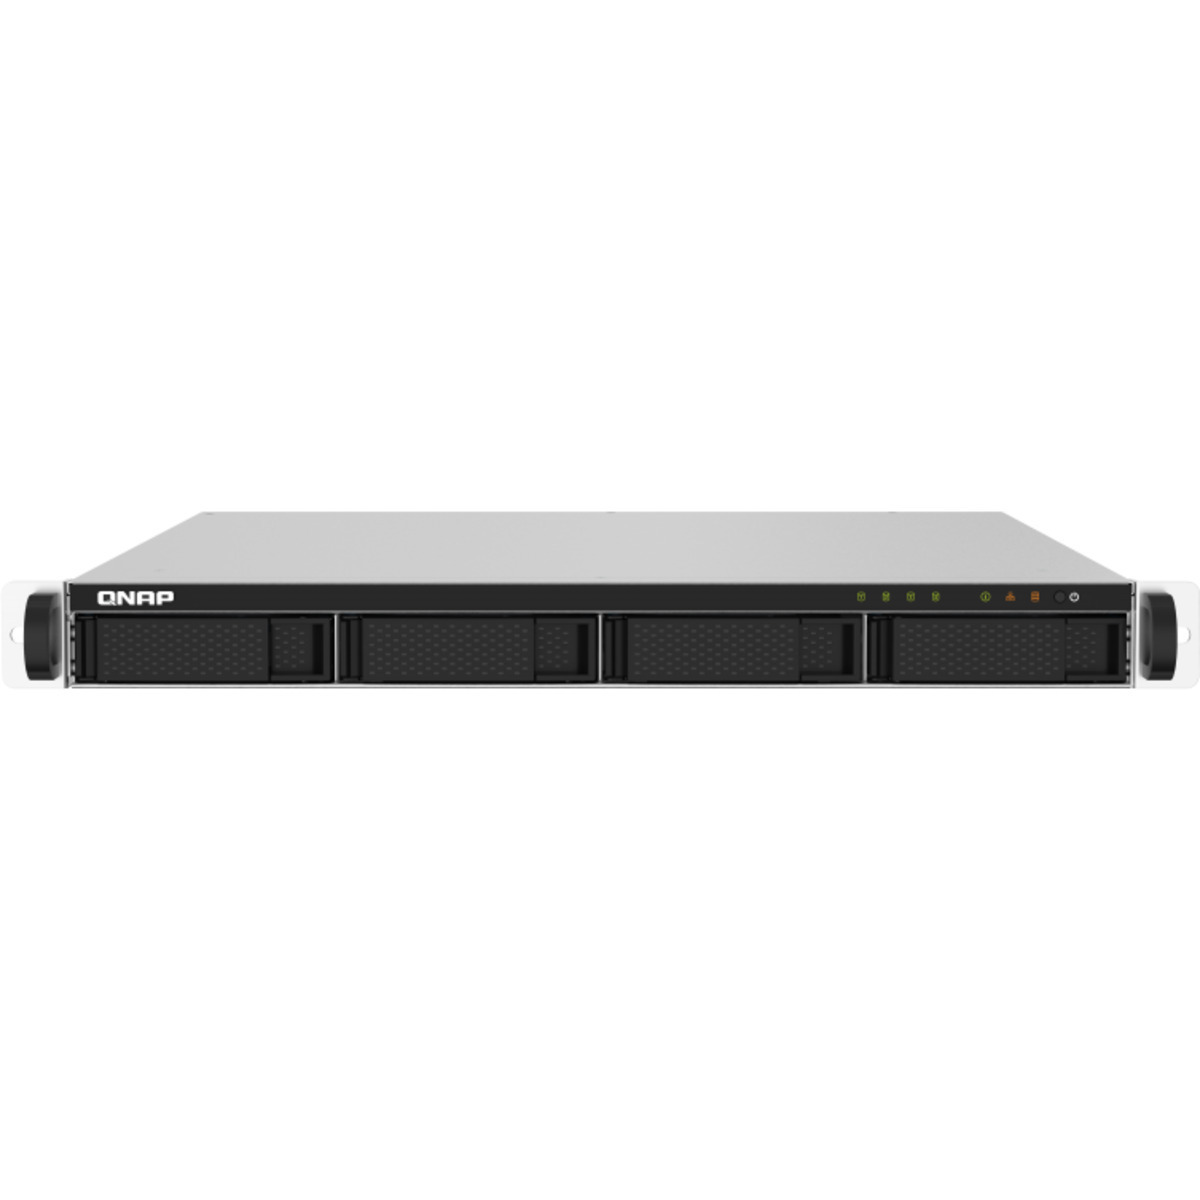 QNAP TS-432PXU 28tb 4-Bay RackMount Personal / Basic Home / Small Office NAS - Network Attached Storage Device 2x14tb Western Digital Red Pro WD142KFGX 3.5 7200rpm SATA 6Gb/s HDD NAS Class Drives Installed - Burn-In Tested - FREE RAM UPGRADE TS-432PXU